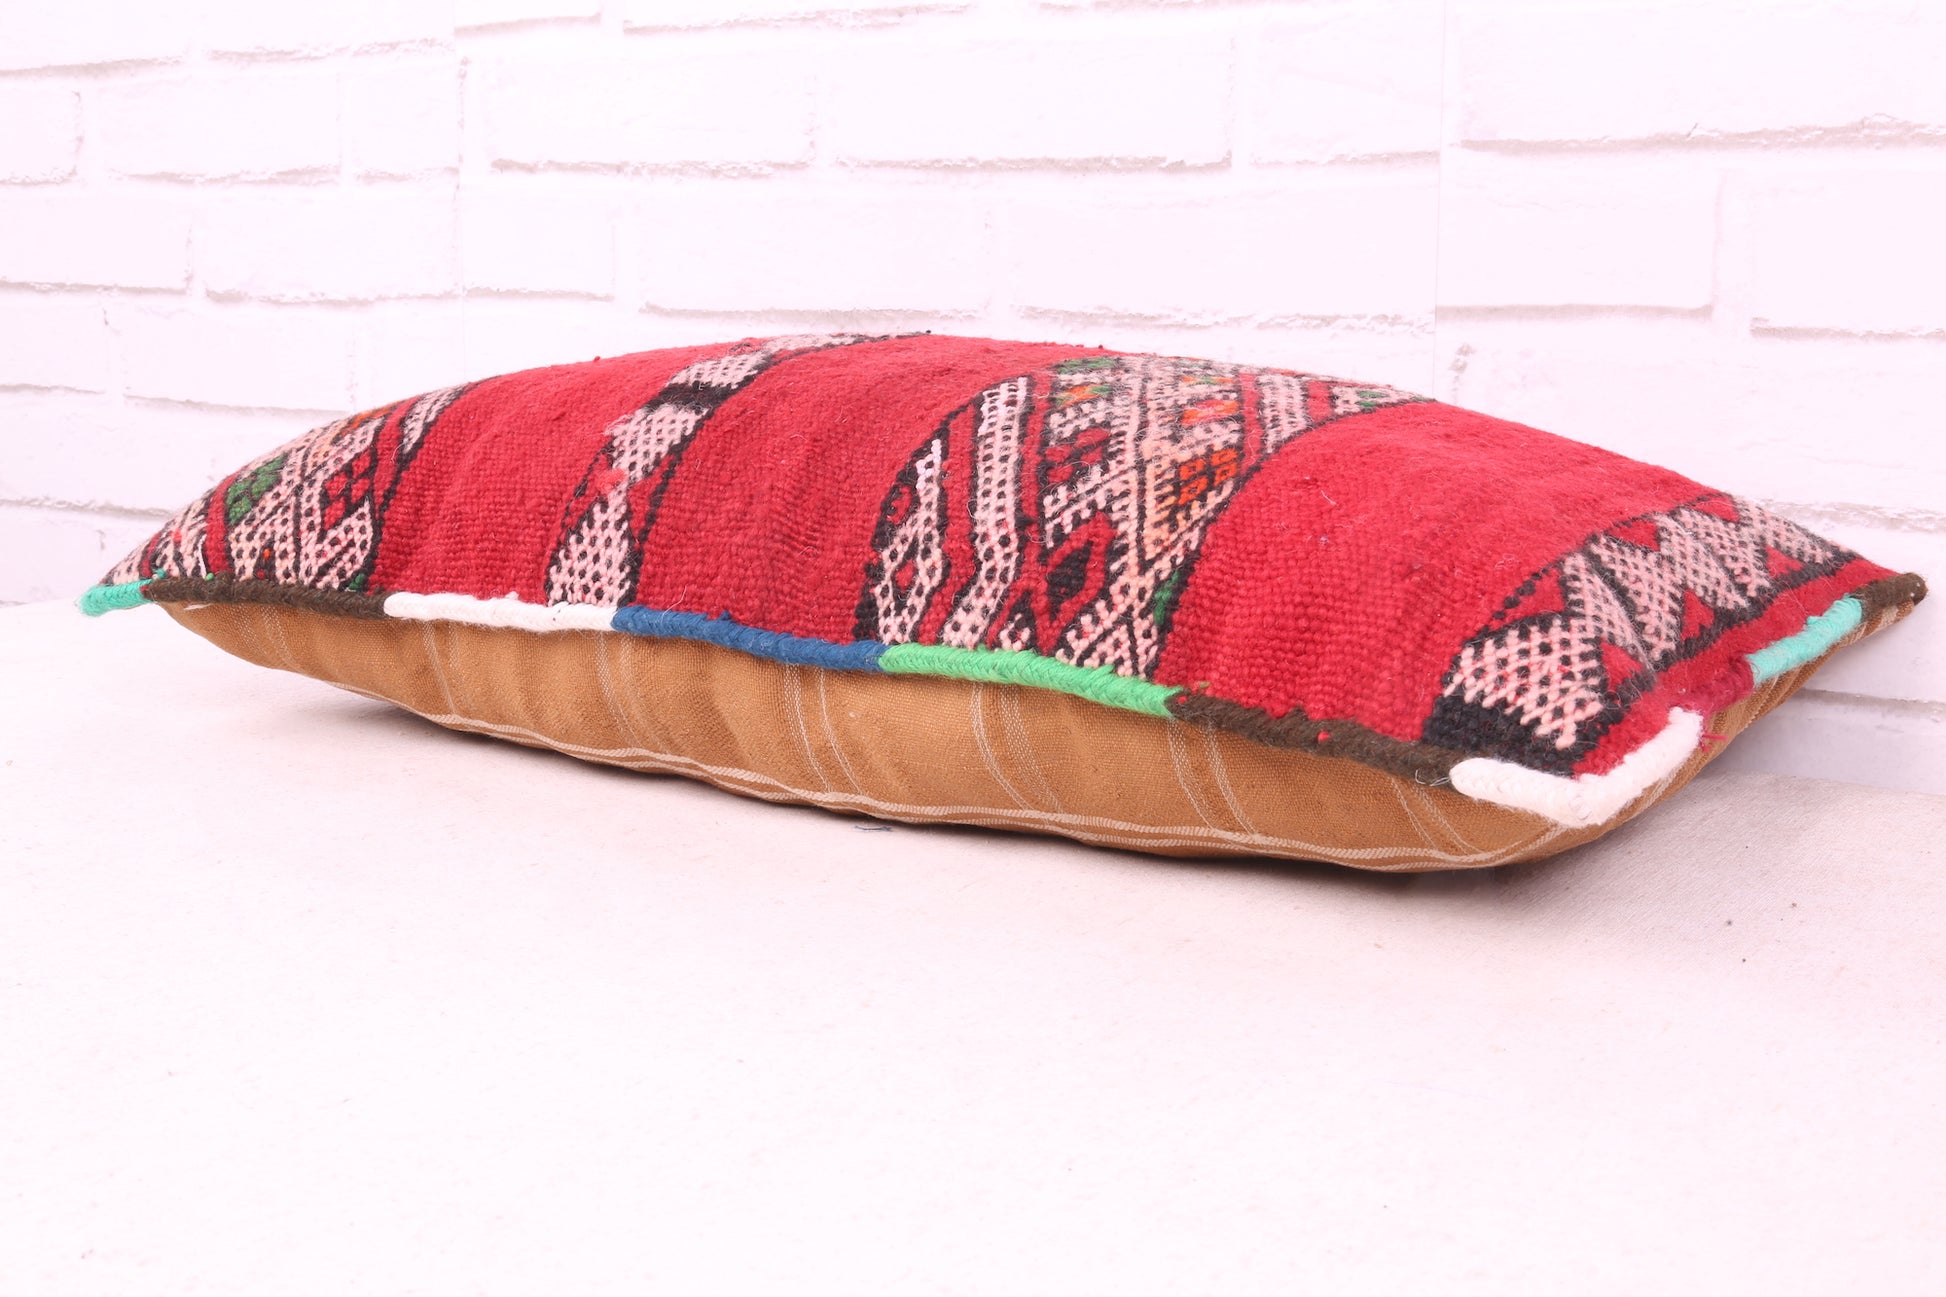 Berber cushion # Coussin kilim brodé REF B1 with filling type Cushions  kilim with embroidery 90cm x 50cm.